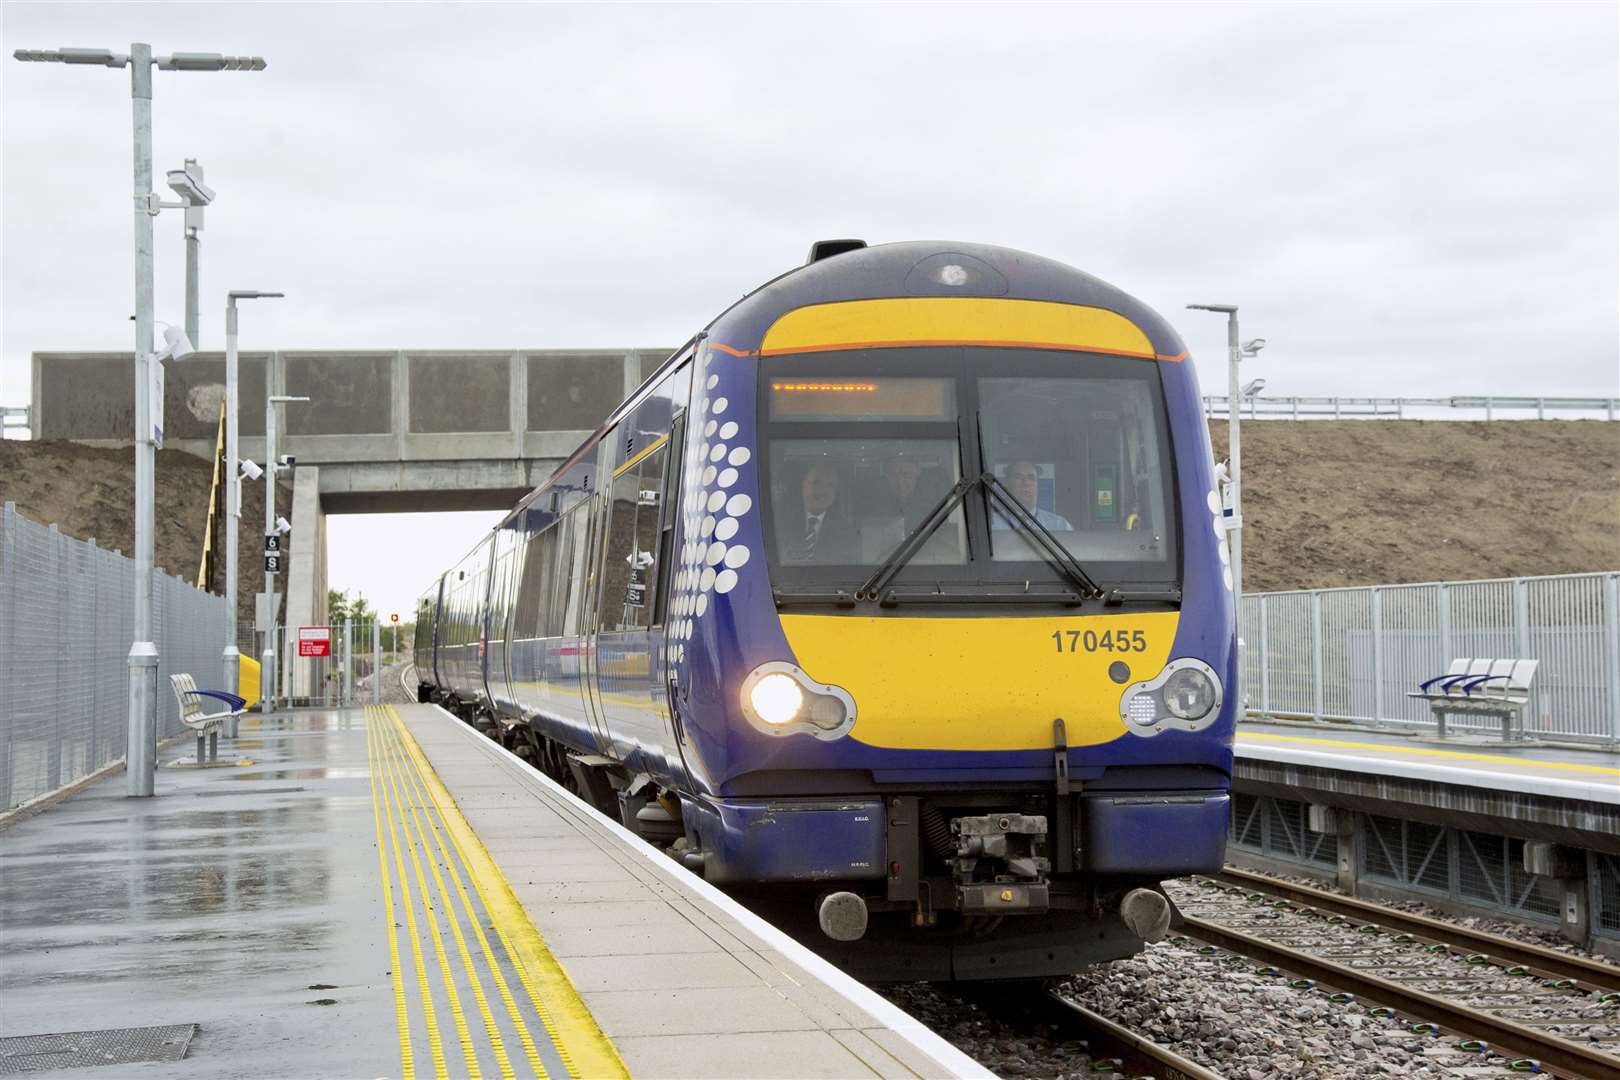 A ScotRail train arrives at a north station.